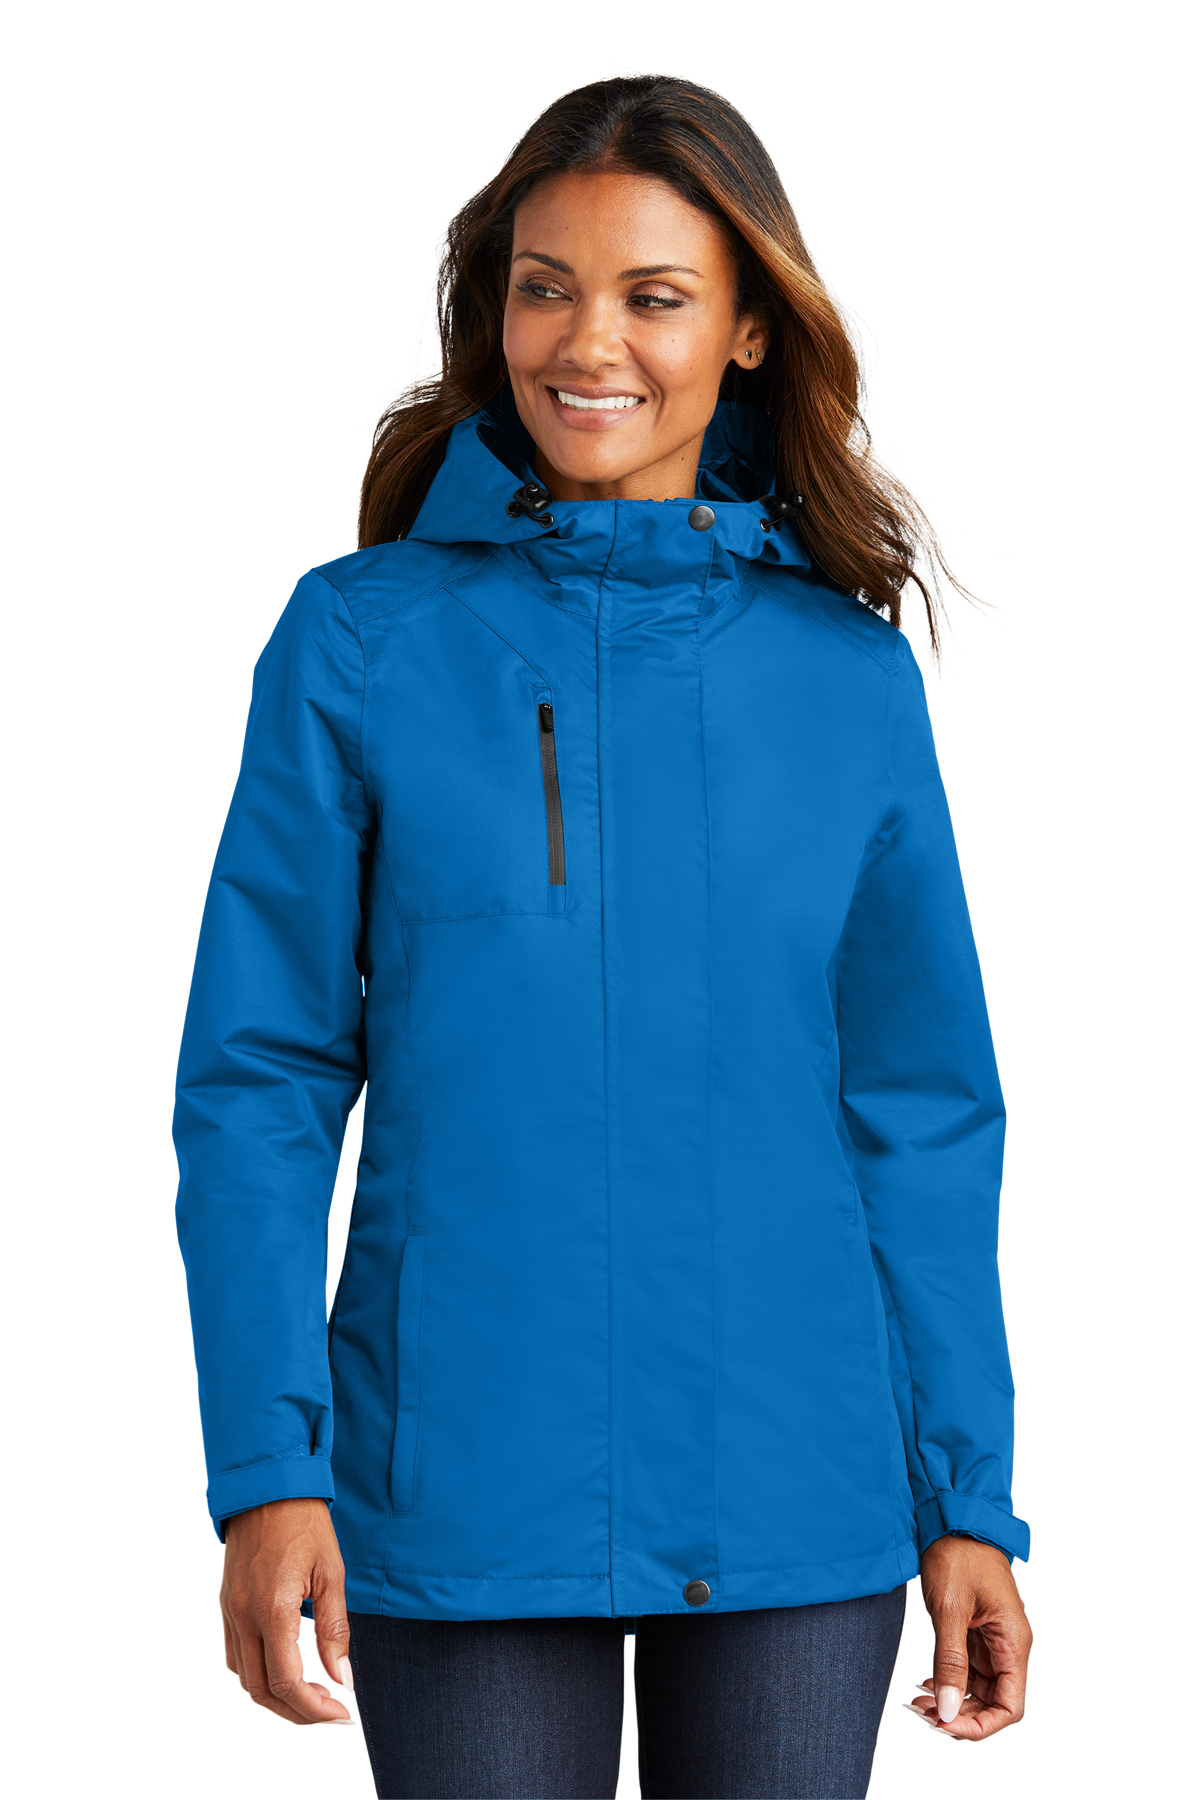 Ladies All-Conditions Port | Product Jacket SanMar | Authority